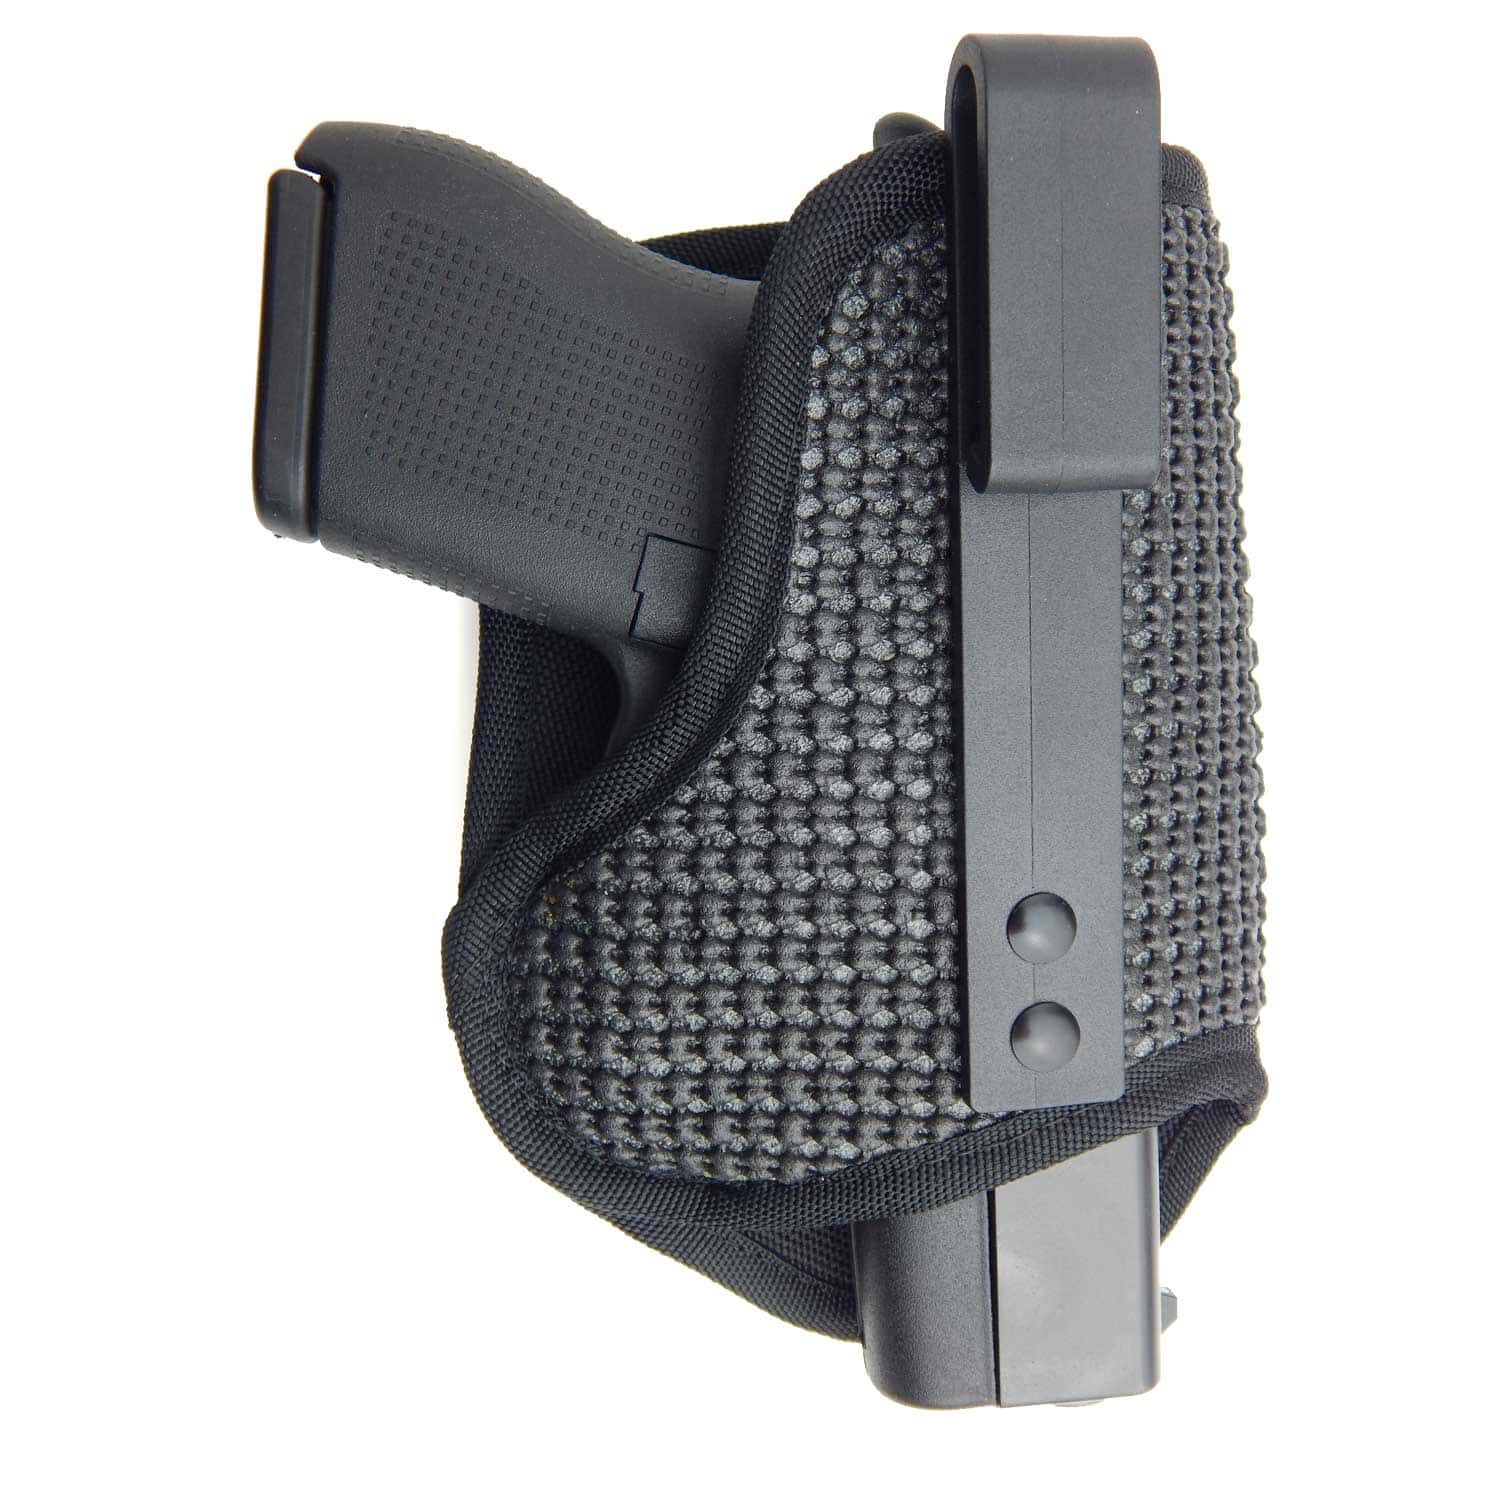 1. The Importance of Deep Concealment Holsters for Larger Firearms